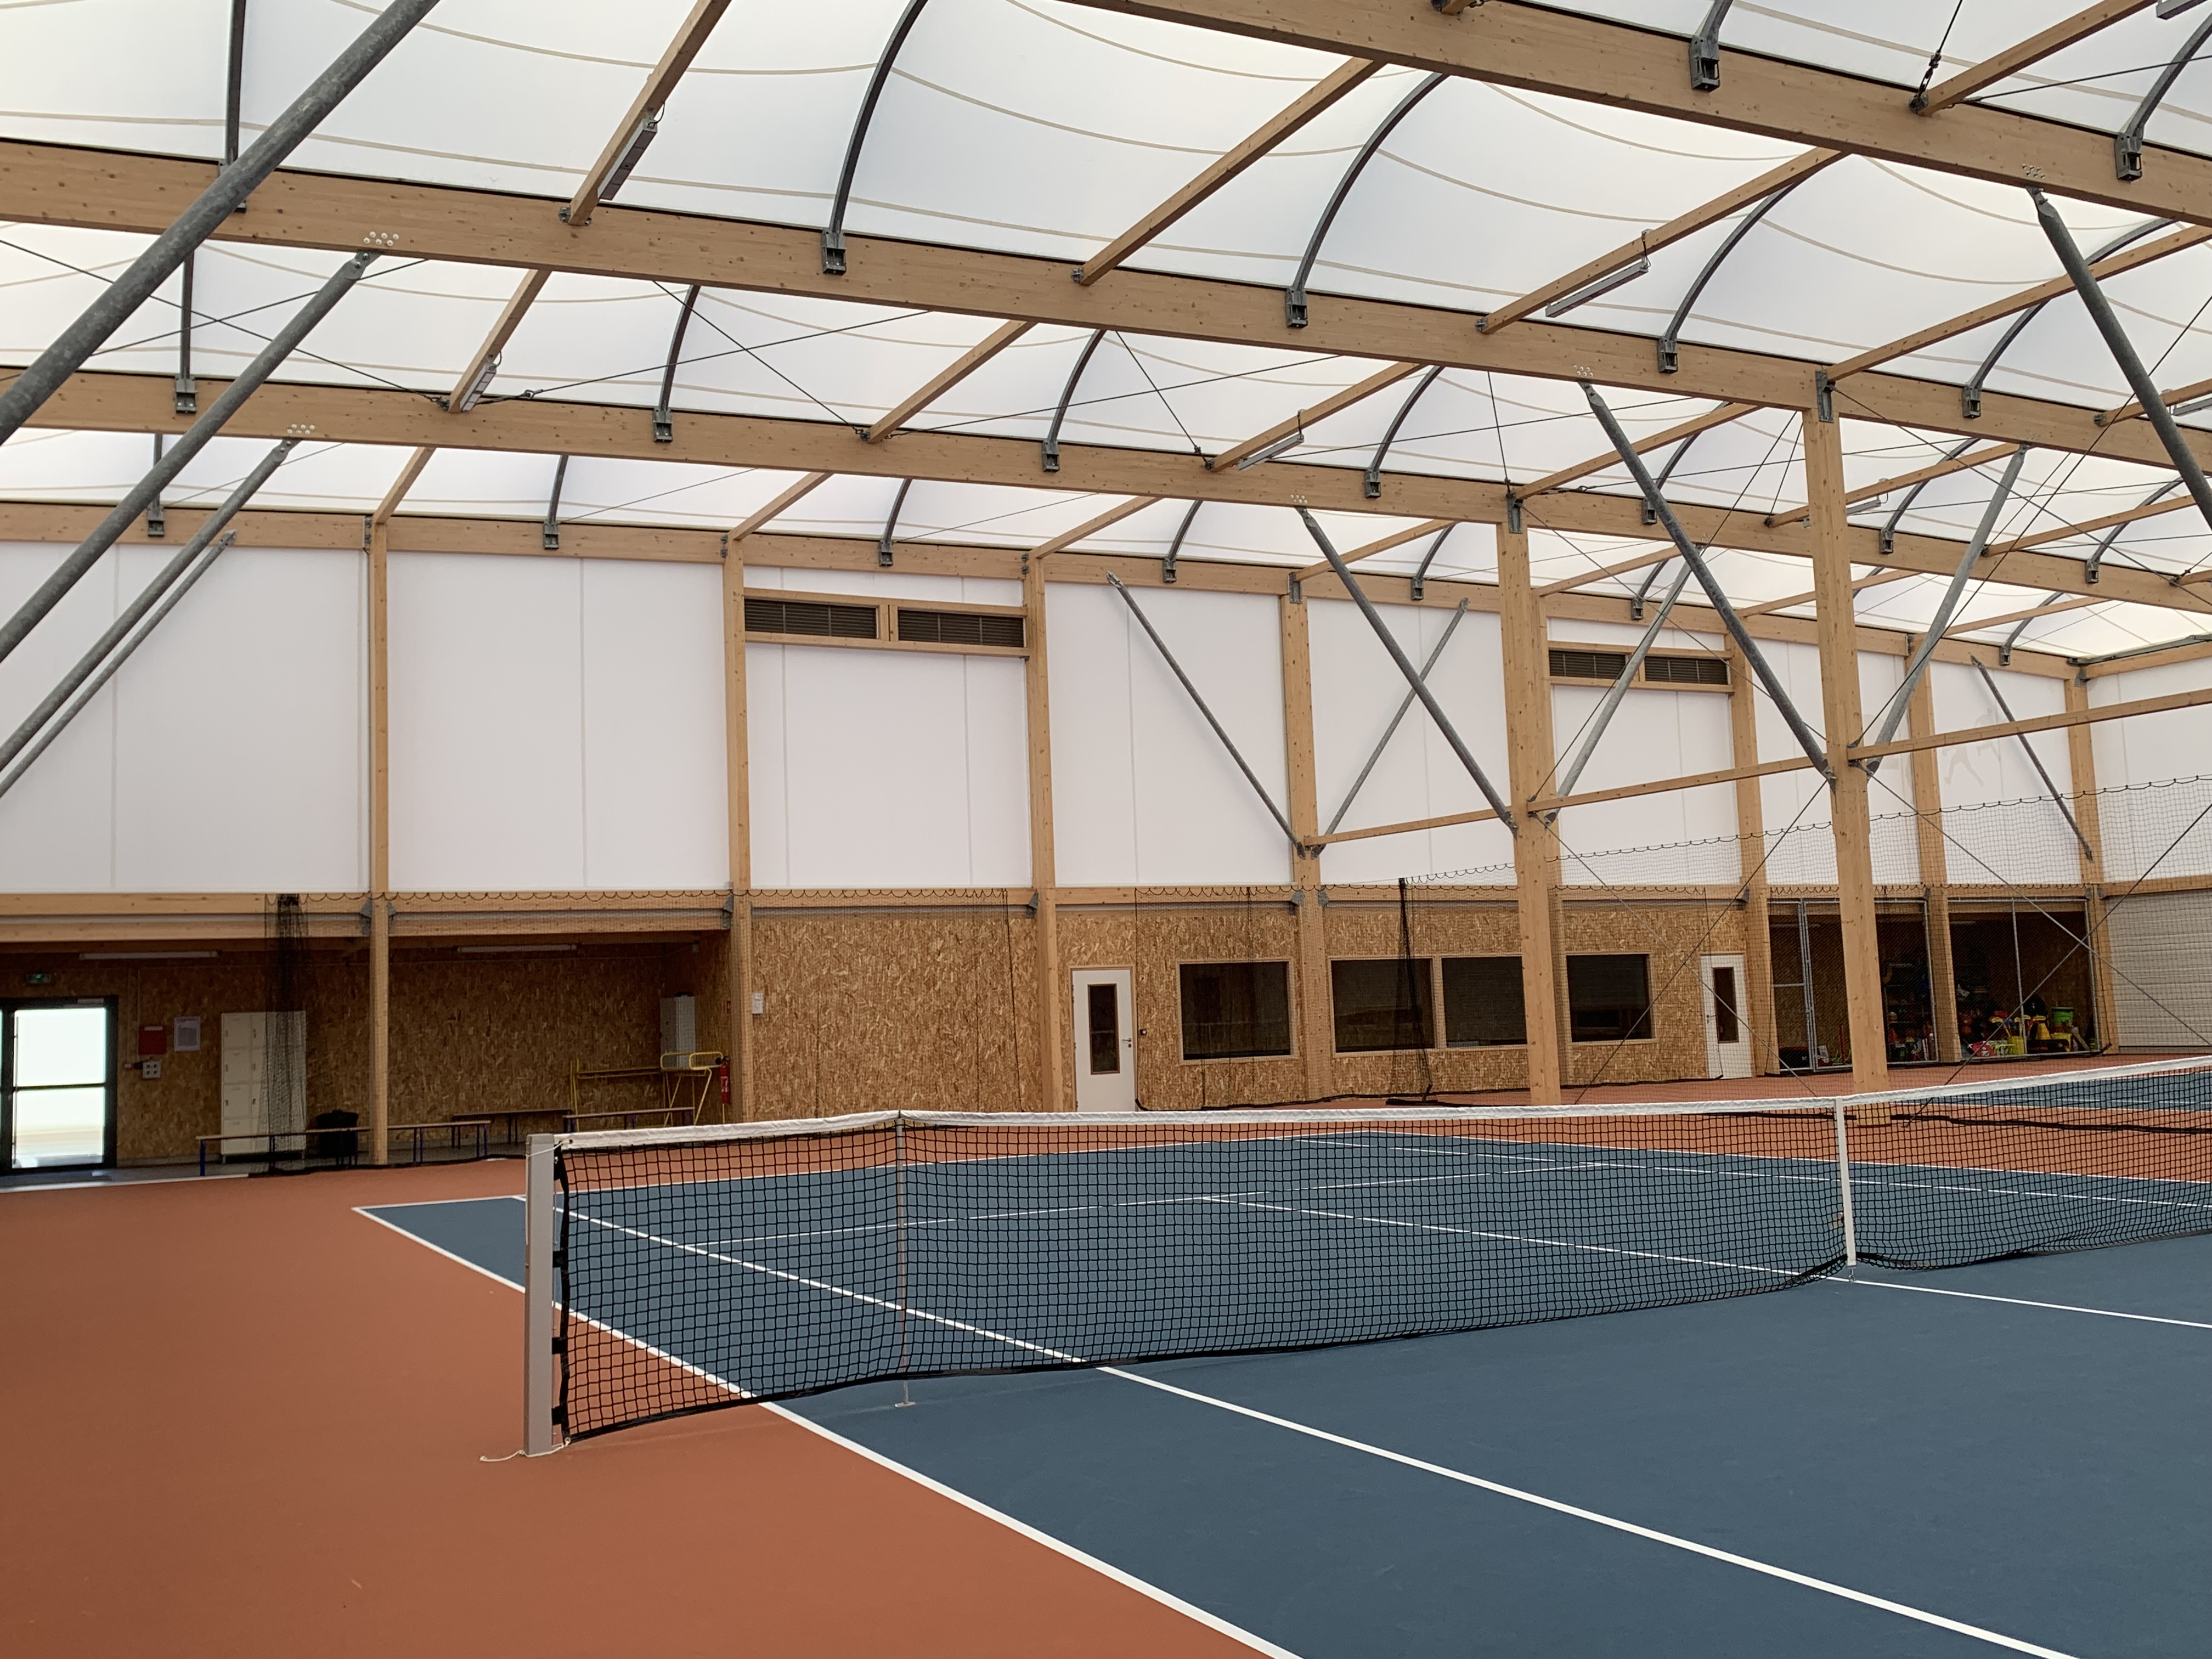 Courts tennis couvert 2.JPG